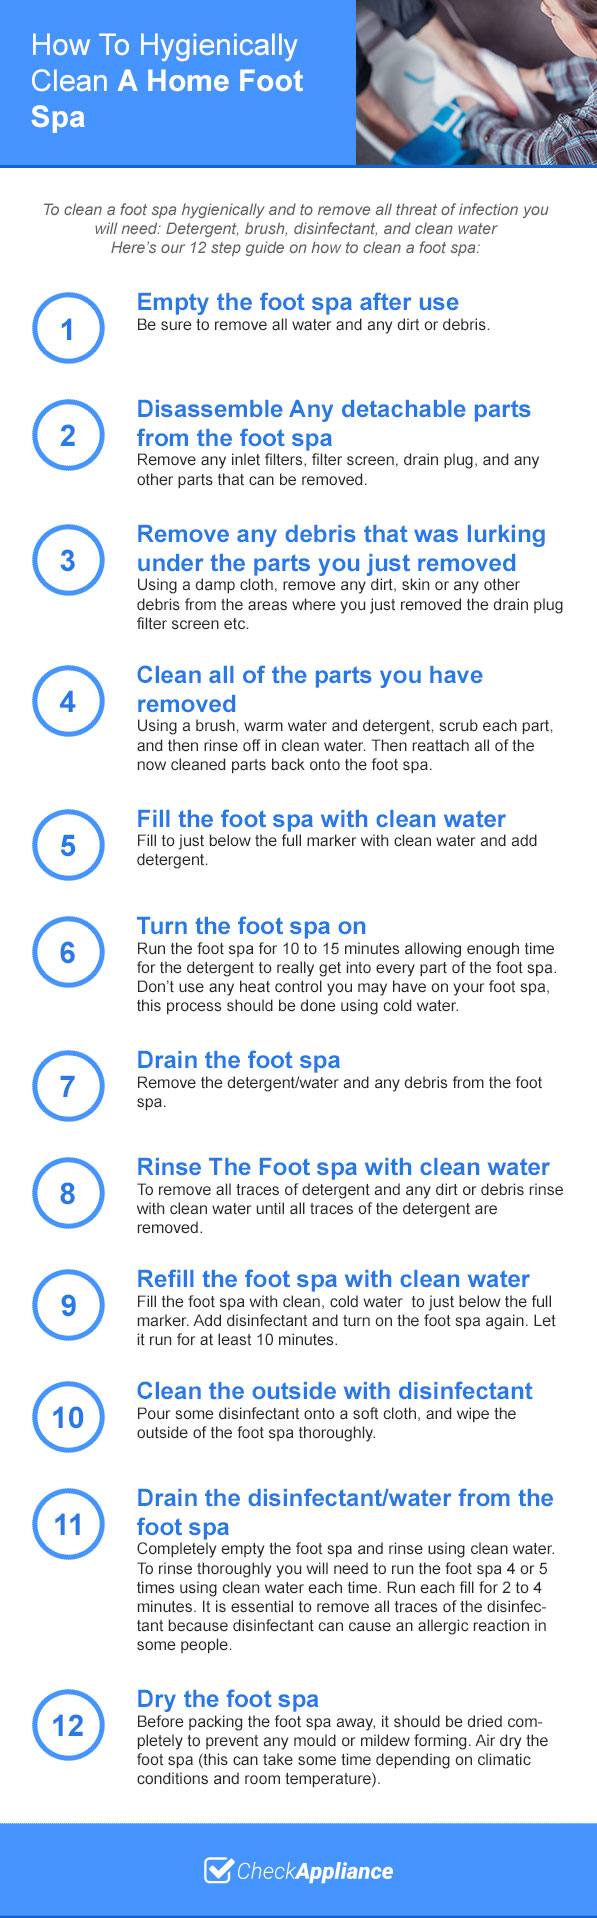 How To Hygienically Clean A Home Foot Spa